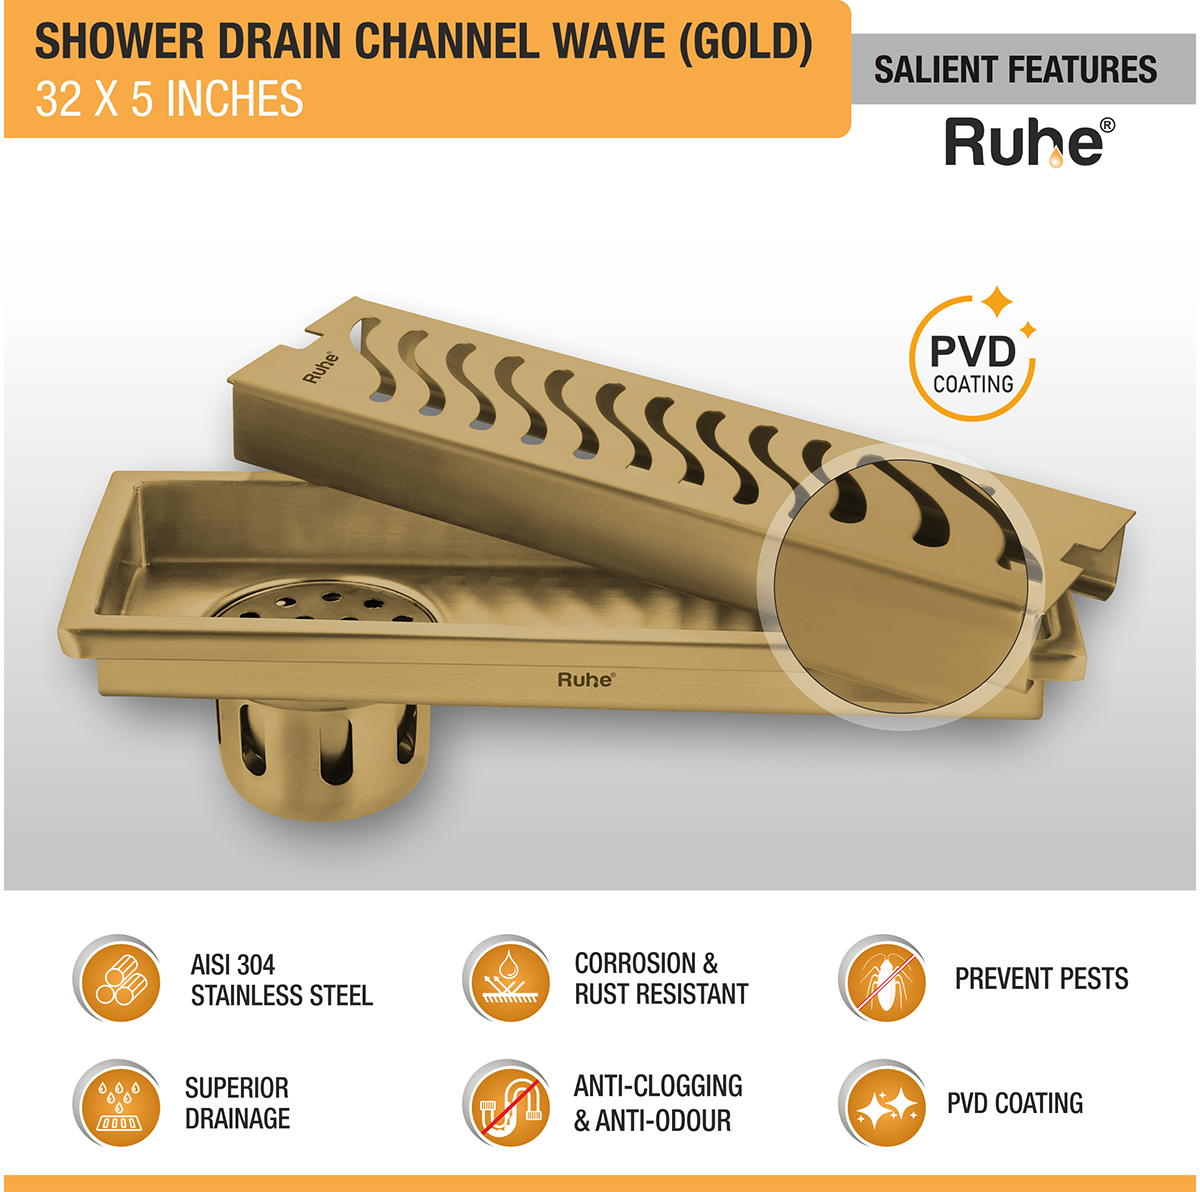 Wave Shower Drain Channel (32 x 5 Inches) YELLOW GOLD features